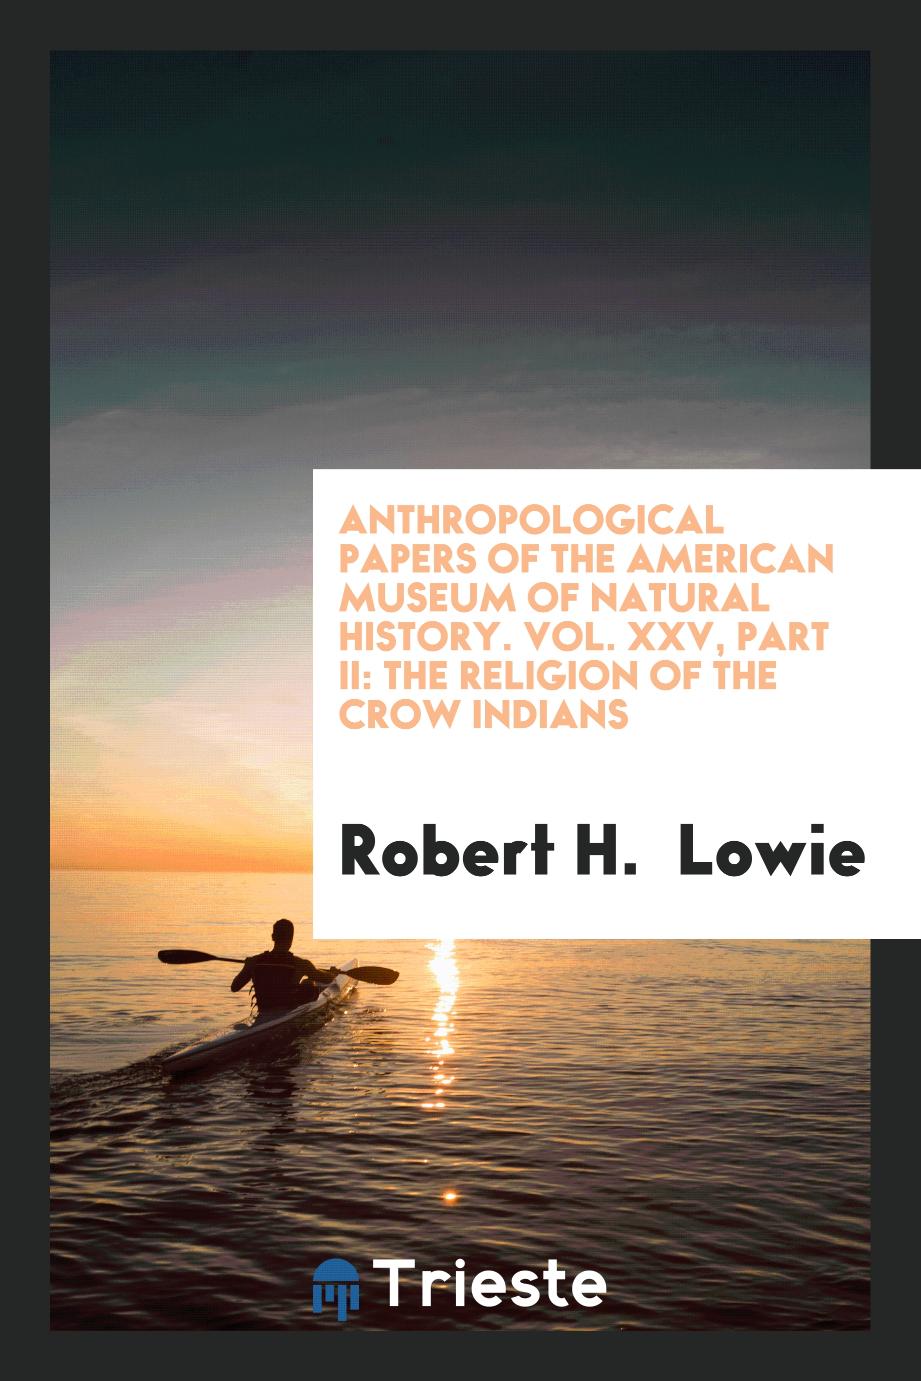 Anthropological Papers of the American Museum of Natural History. Vol. XXV, Part II: The Religion of the Crow Indians